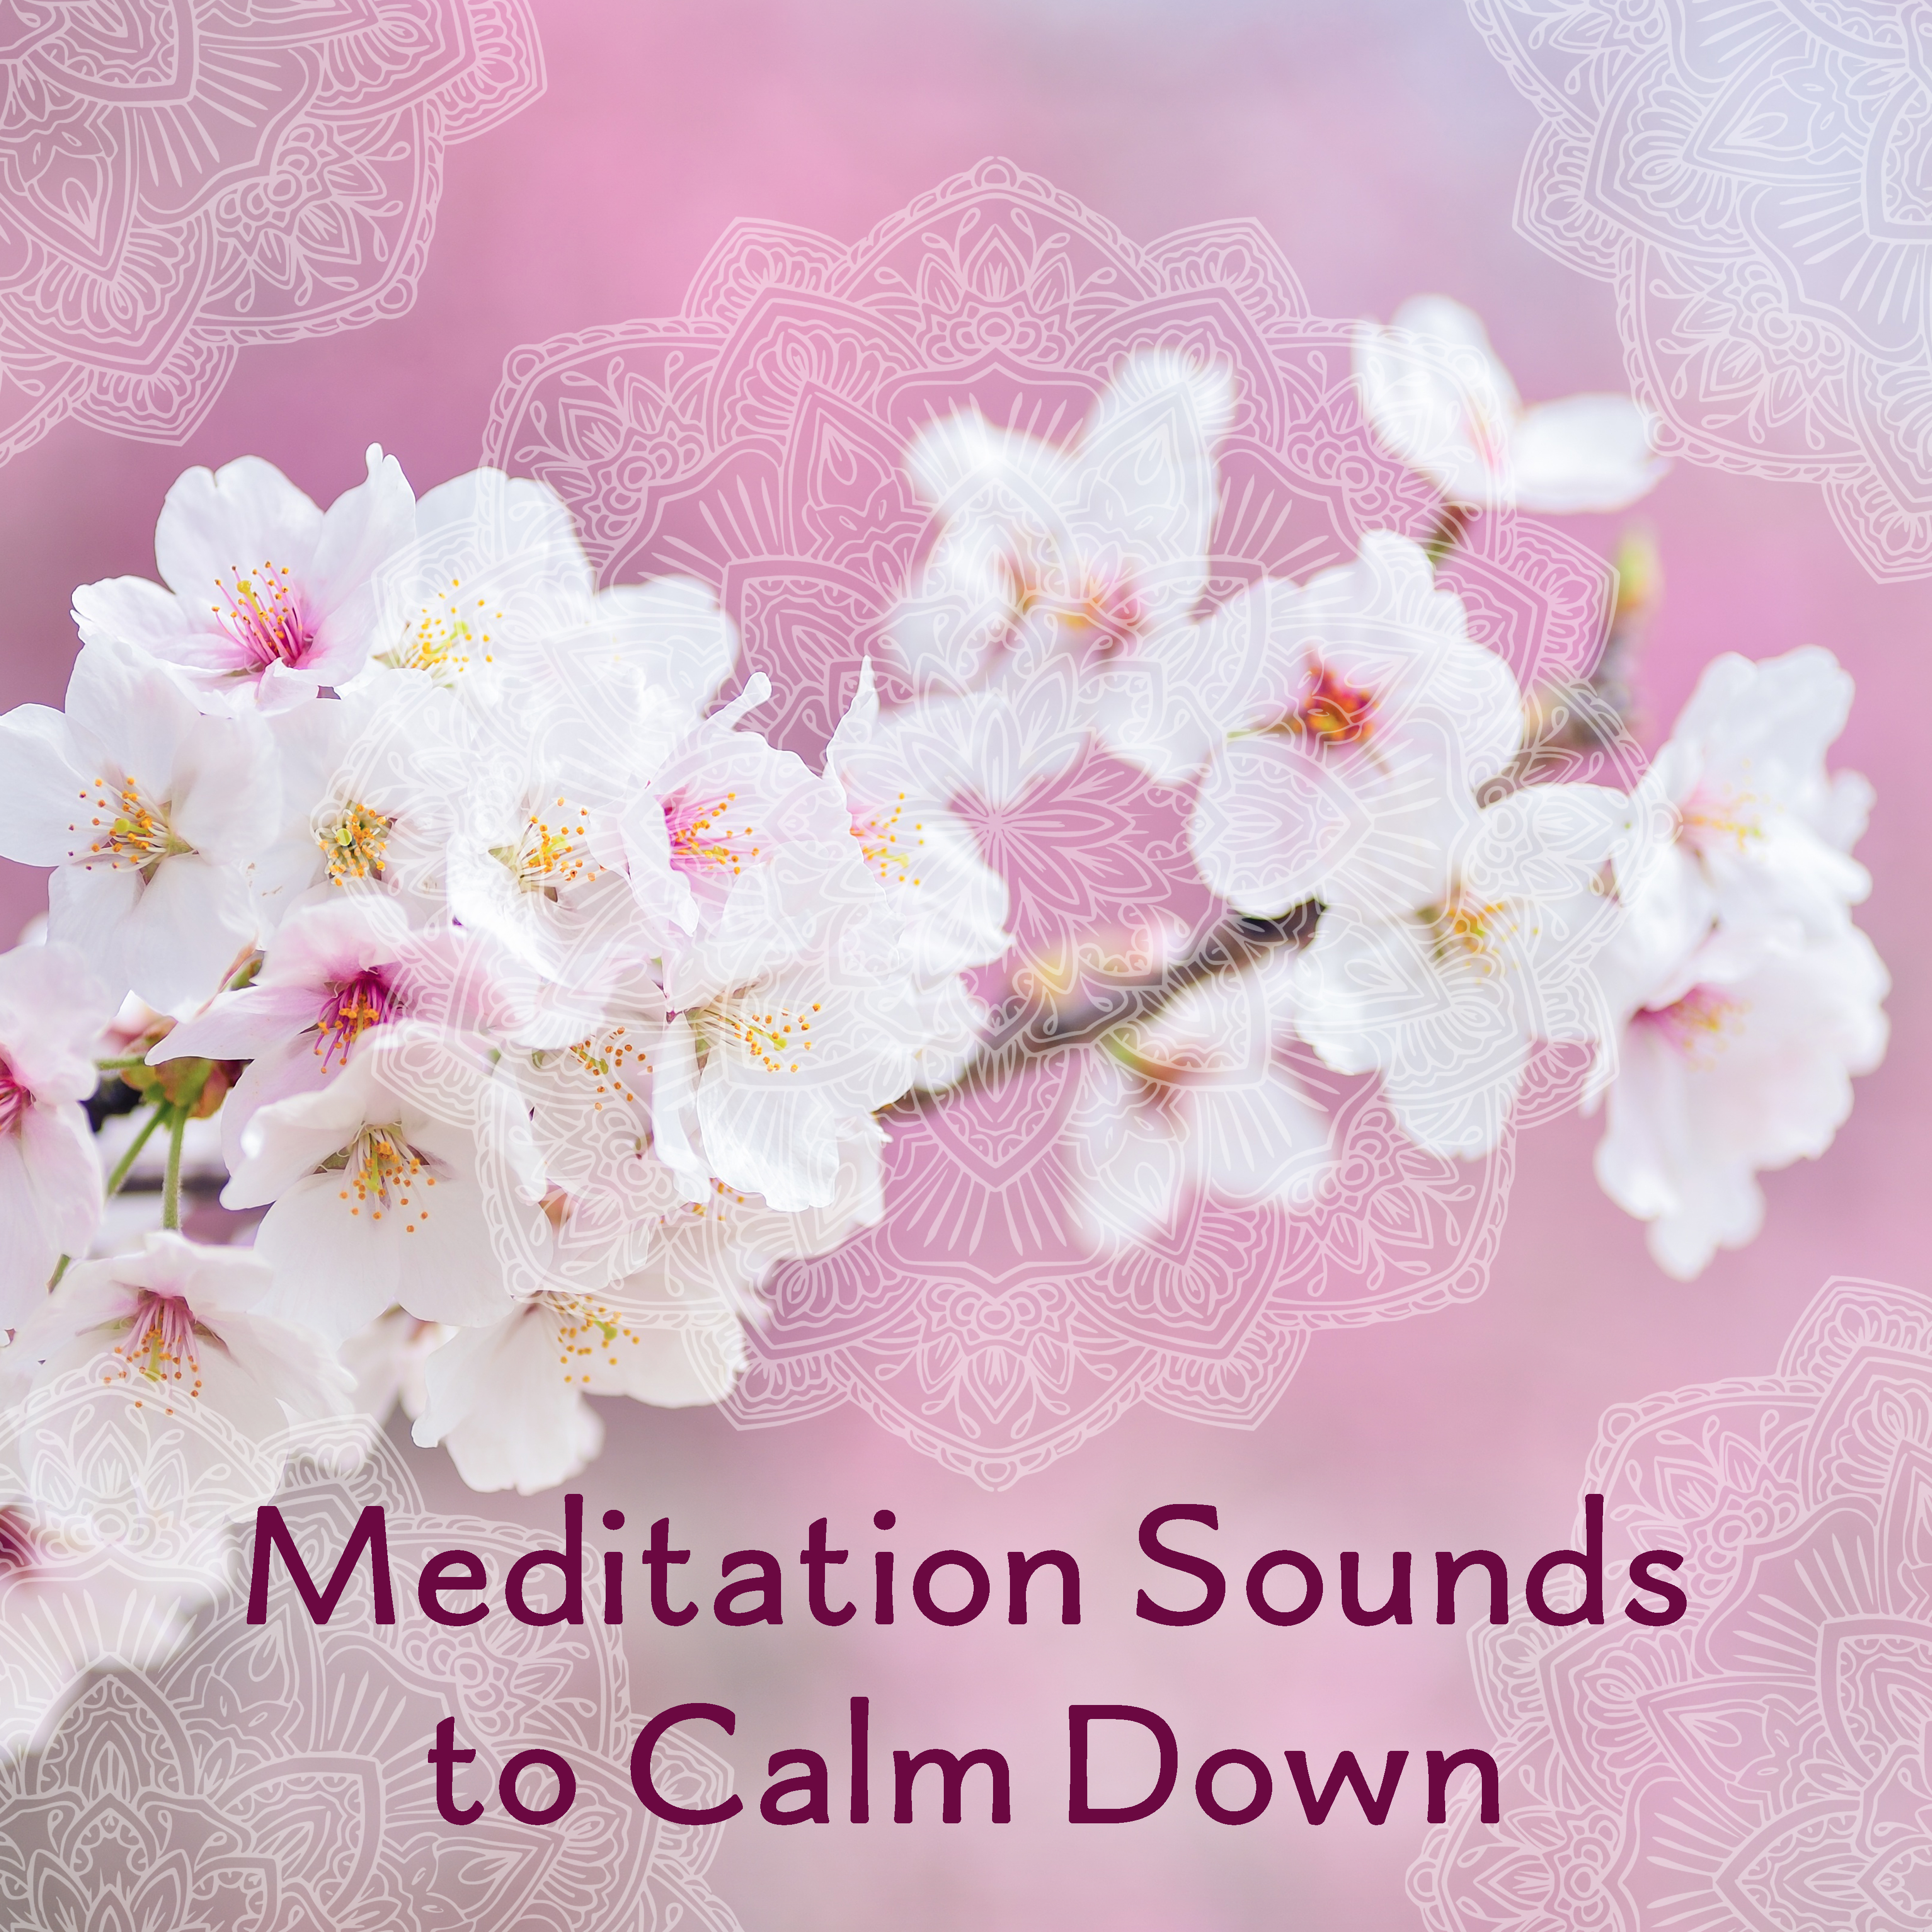 Meditation Sounds to Calm Down – Sounds for Inner Calmness, Peaceful Mind, Body Relaxation, Spiritual Journey